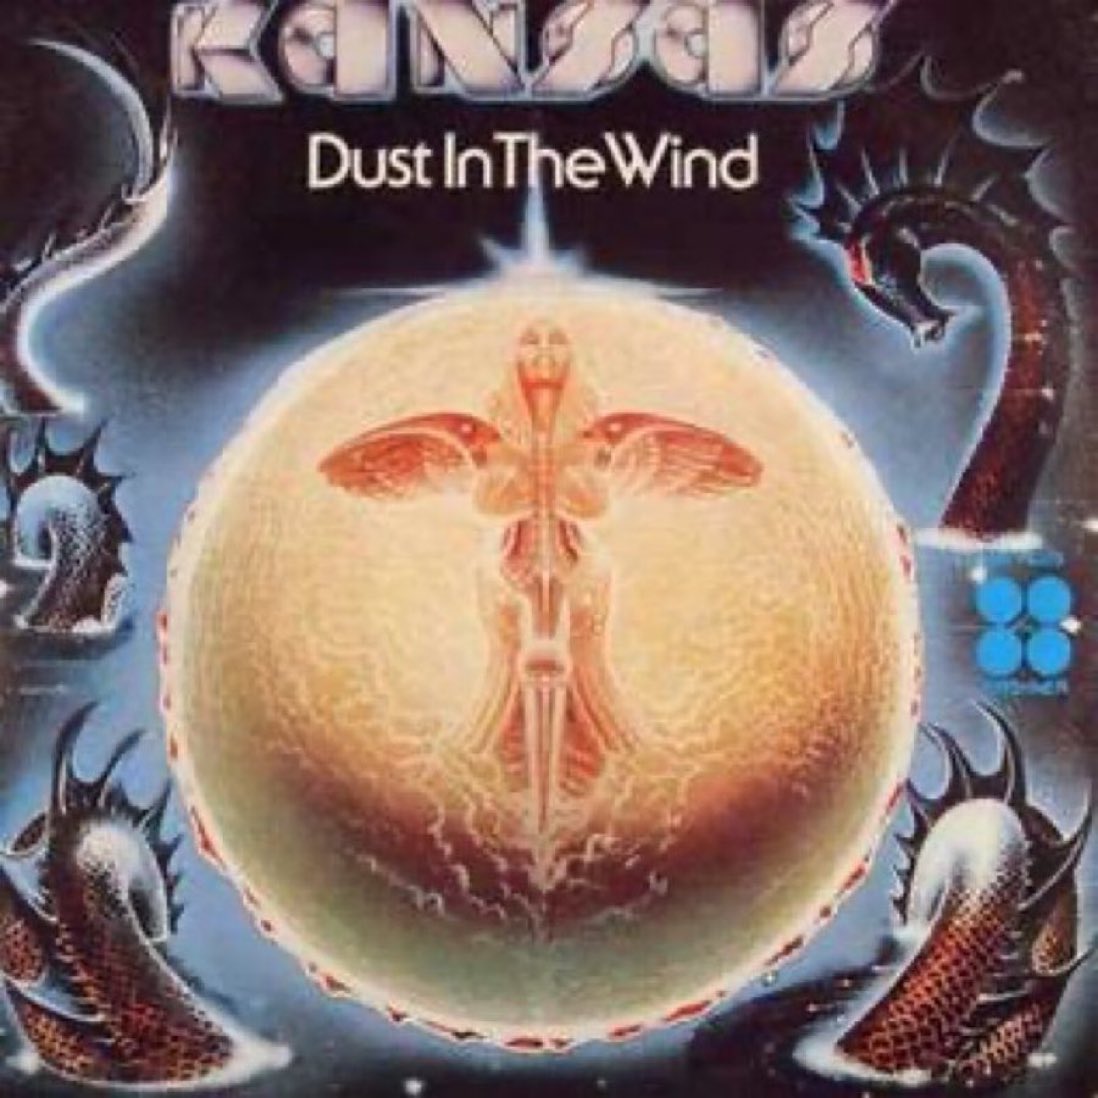 <p>To many listeners, the lyrics of 'Dust in the Wind' may be reminiscent of Bible verses saying that everything a man accomplishes is "like chasing the wind" (Ecclesiastes) or that people are made of, and will return to, dust (Genesis). However, the song actually has its origins outside of Christianity.</p>